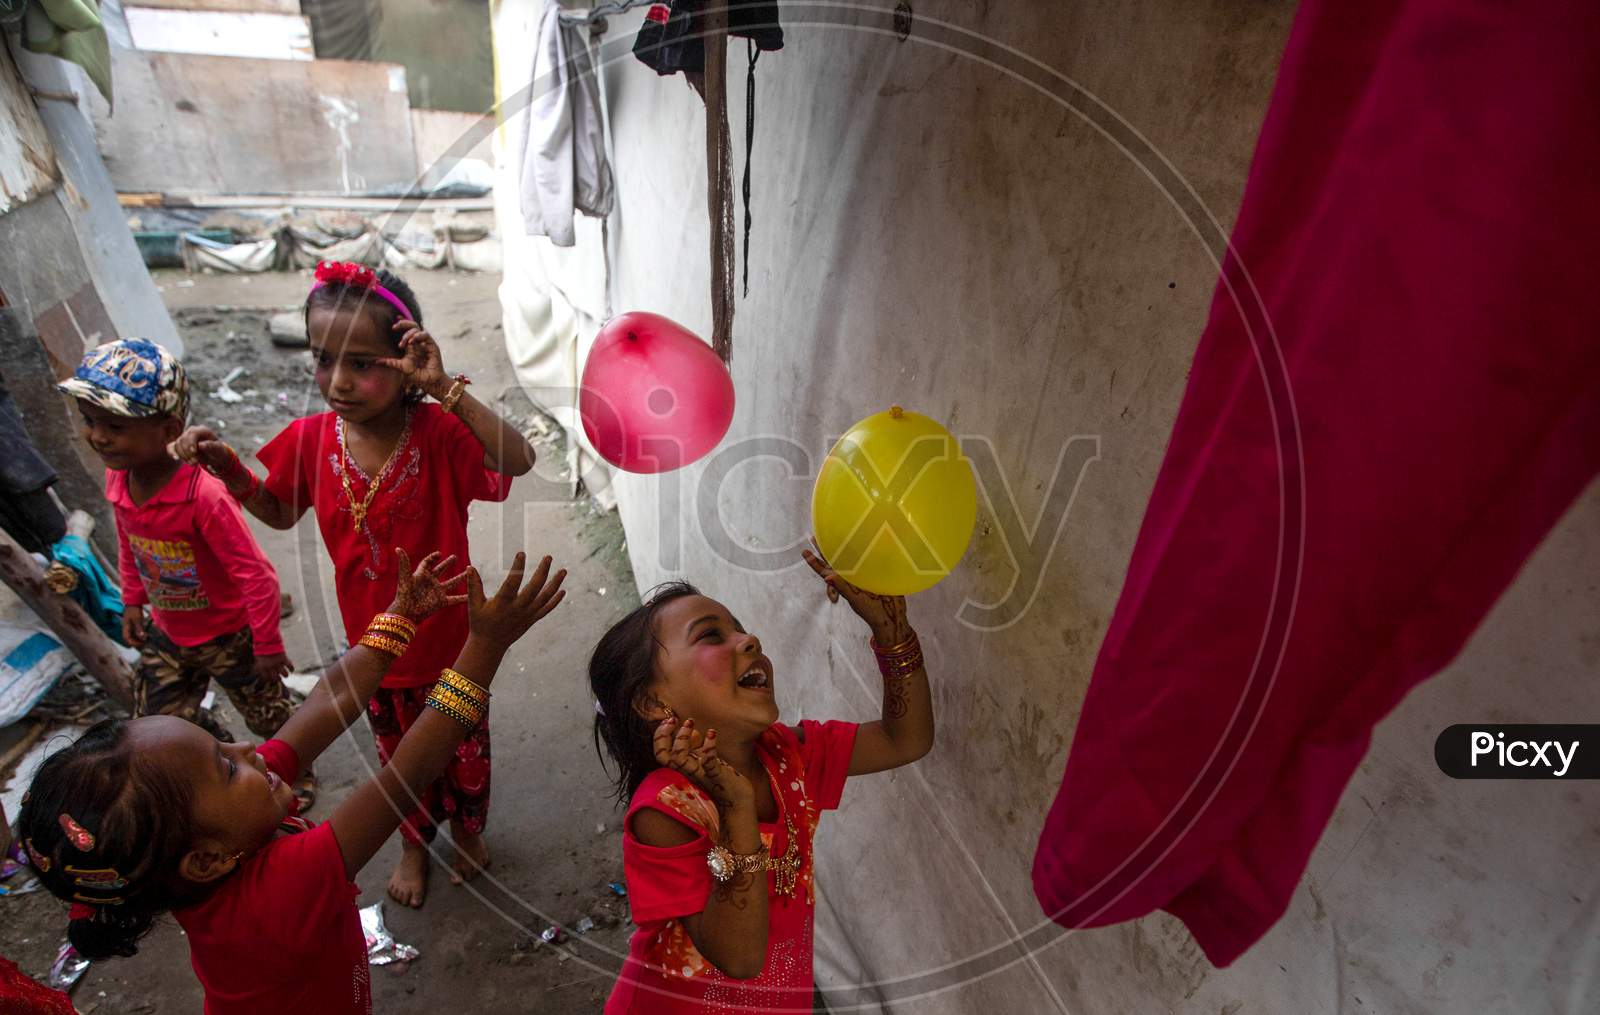 Rohingya refugee children play as they wear new clothes and make up during Eid Al-Adha (Feast of Sacrifice) festival at a camp in the outskirts of New Delhi, India on August 1, 2020.